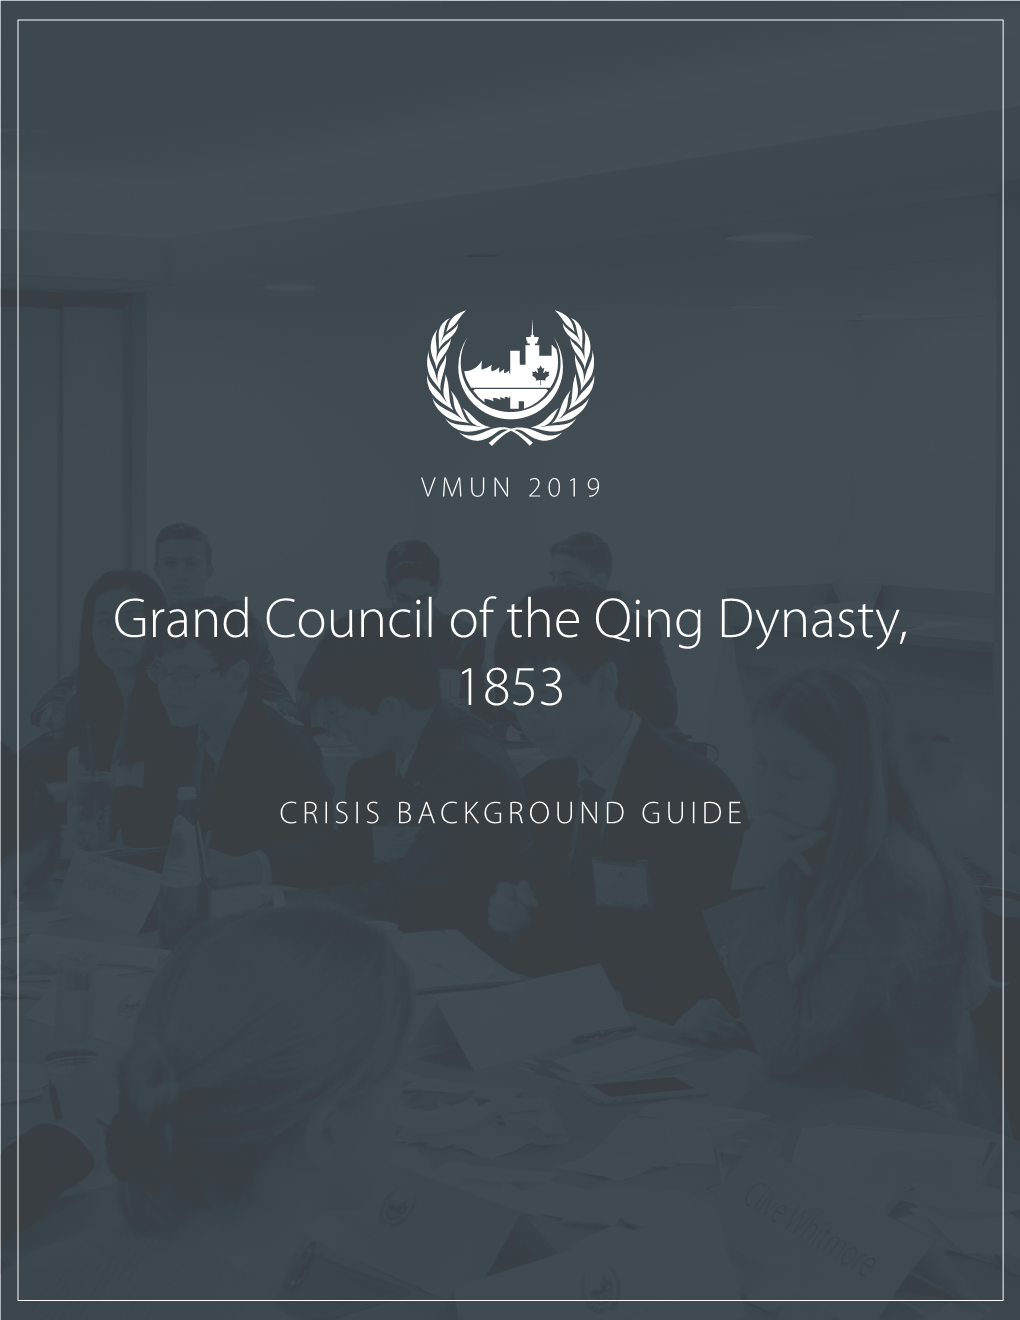 Grand Council of the Qing Dynasty, 1853